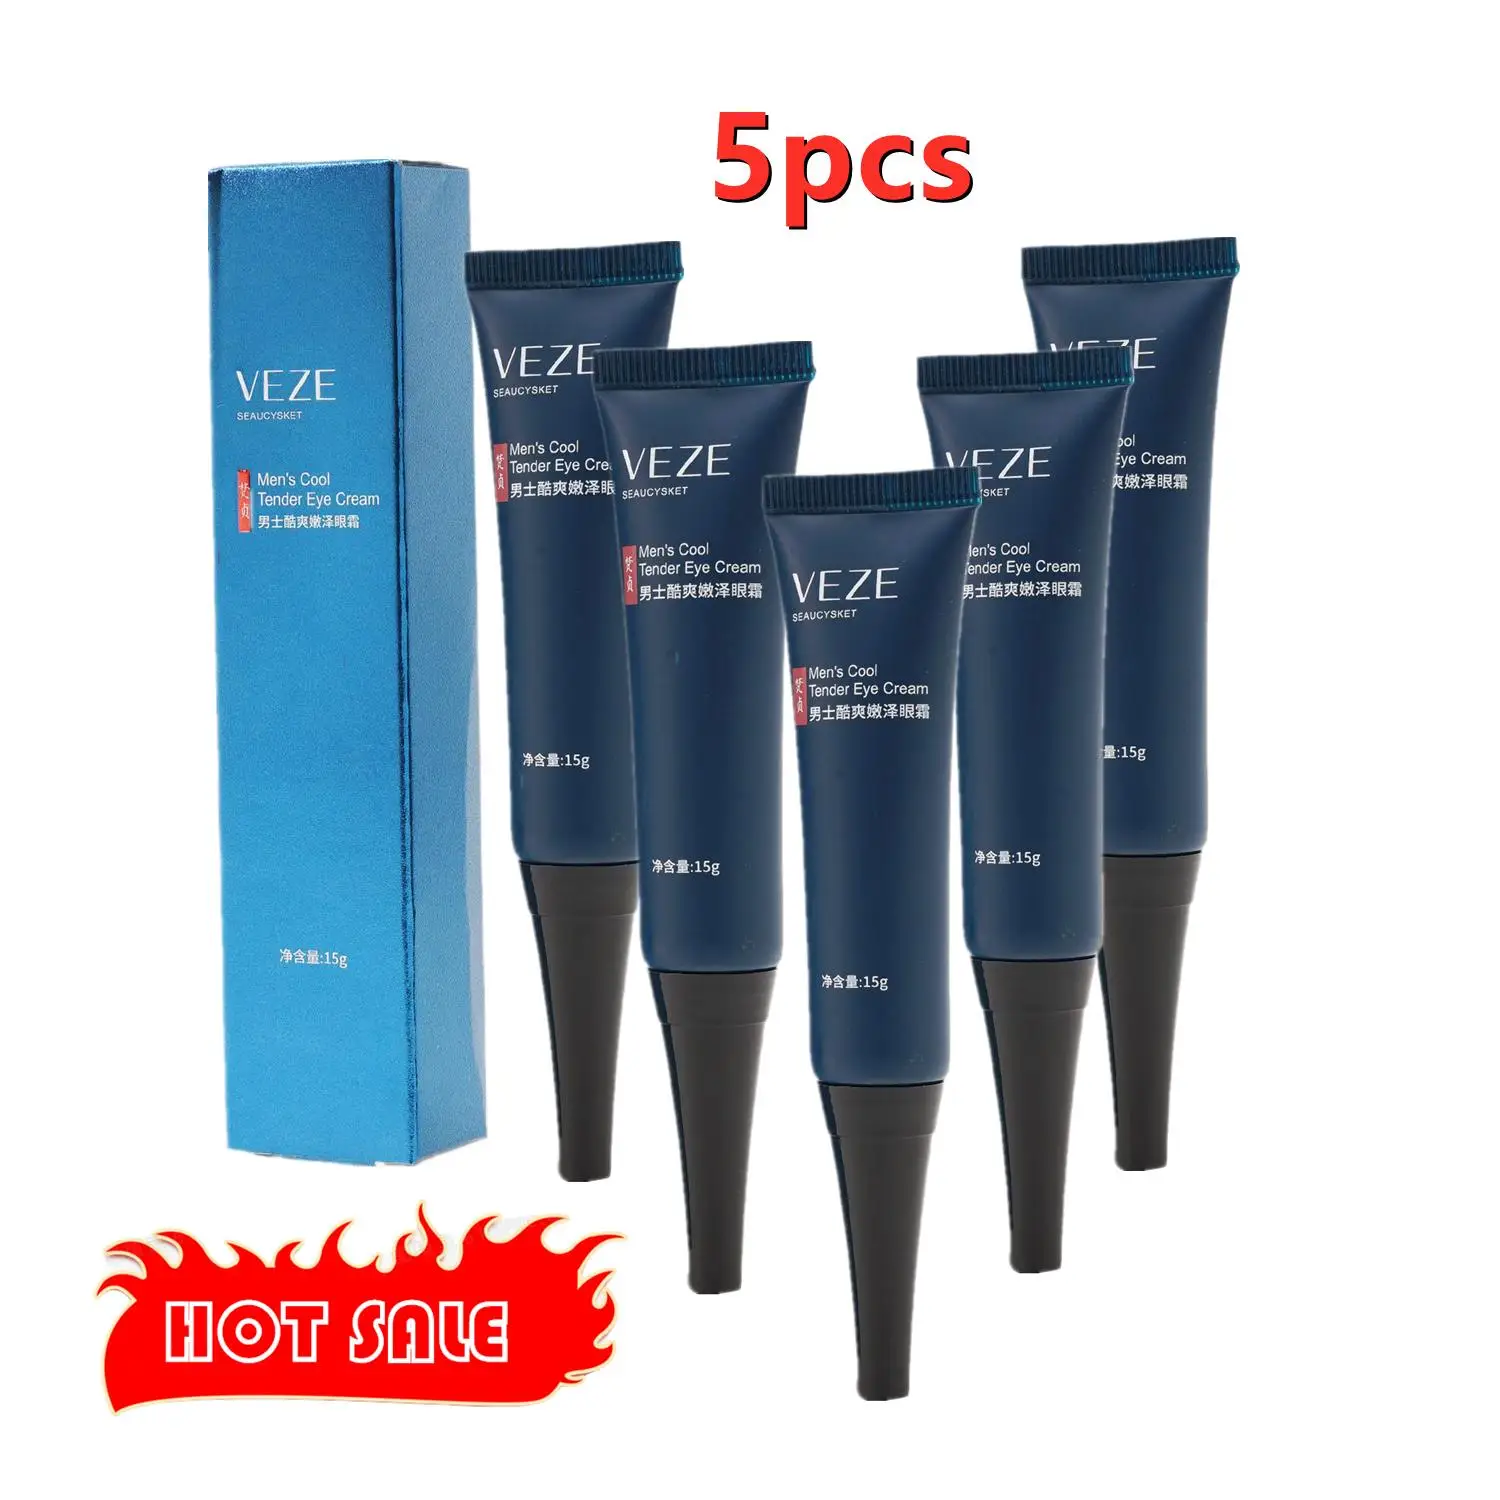 5PCS Day And Night Men's Eye Cream Eyes Bags Dark Circles Remove Skin Aging Cream Tight Firming Eye Contour Free Shipping 50pcs rose red poly mailer shipping bags waterproof mailing envelopes self seal post transport bags thickening courier bag